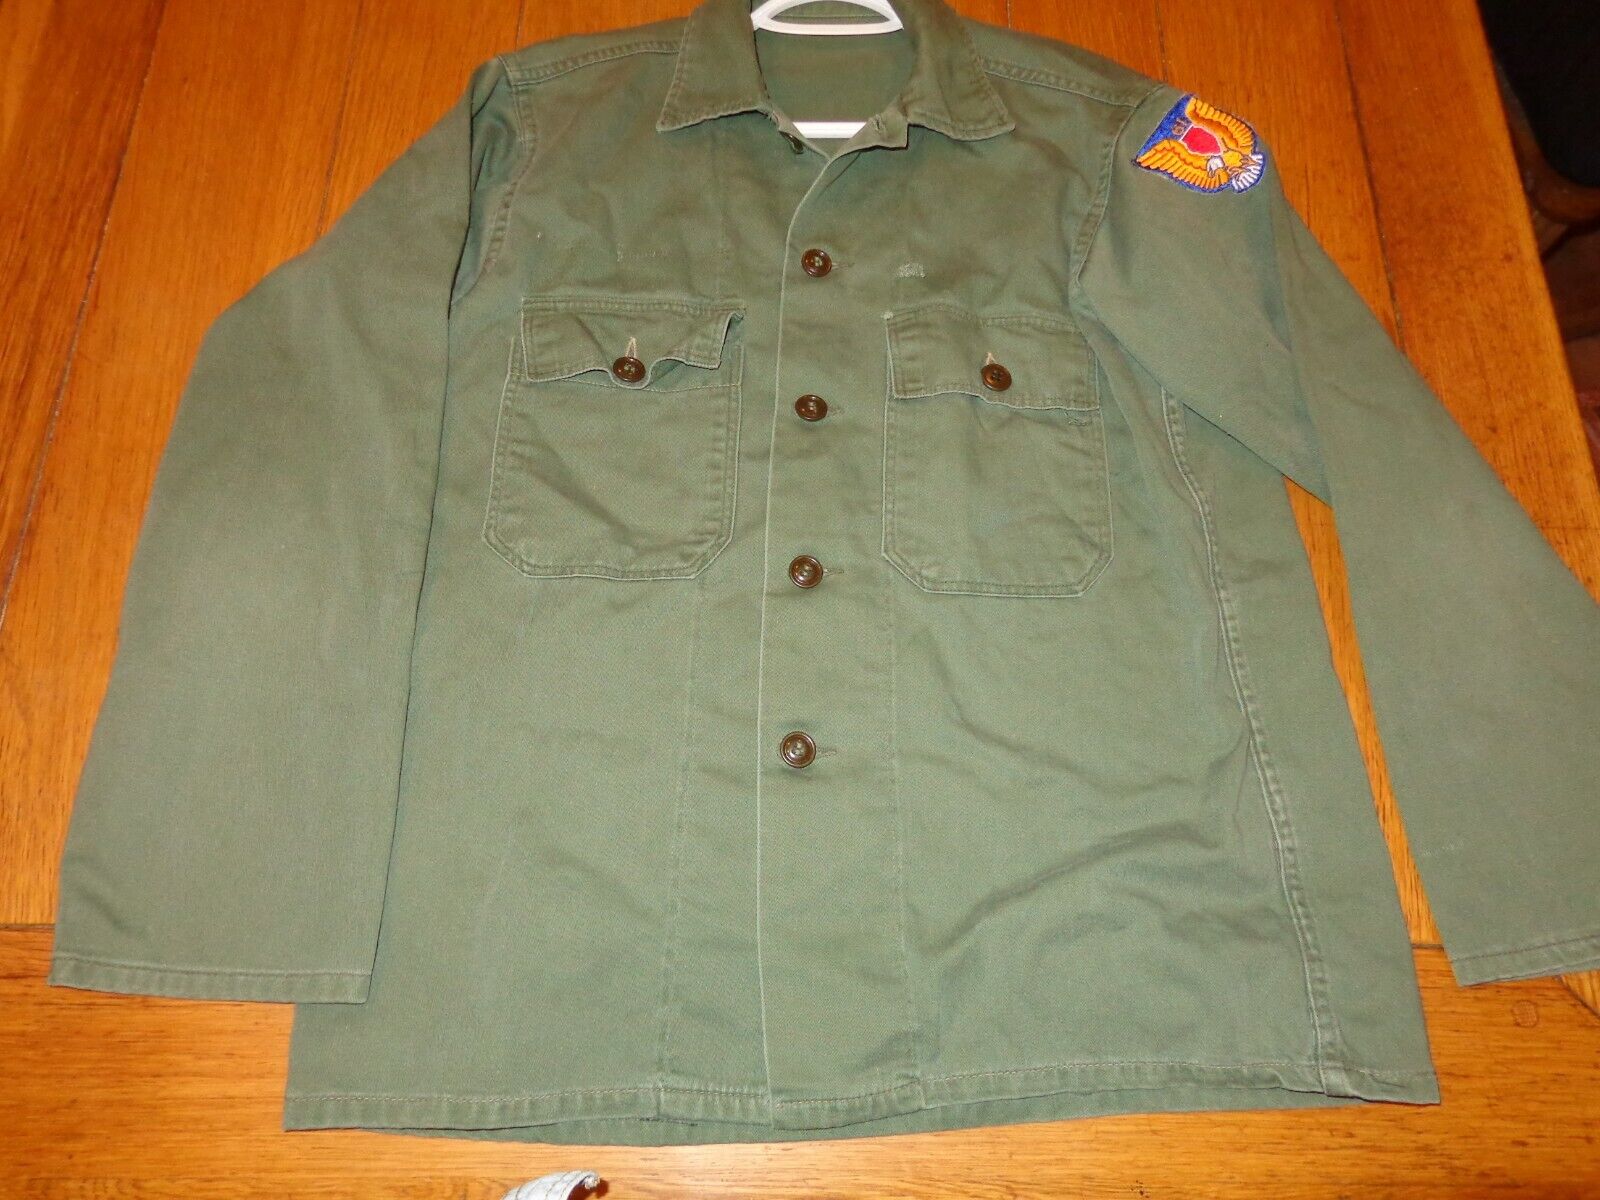 ANTIQUE 1961 US ARMY FATIGUE SHIRT WITH EAGLE PATCH - MENS SIZE MEDIUM # 420